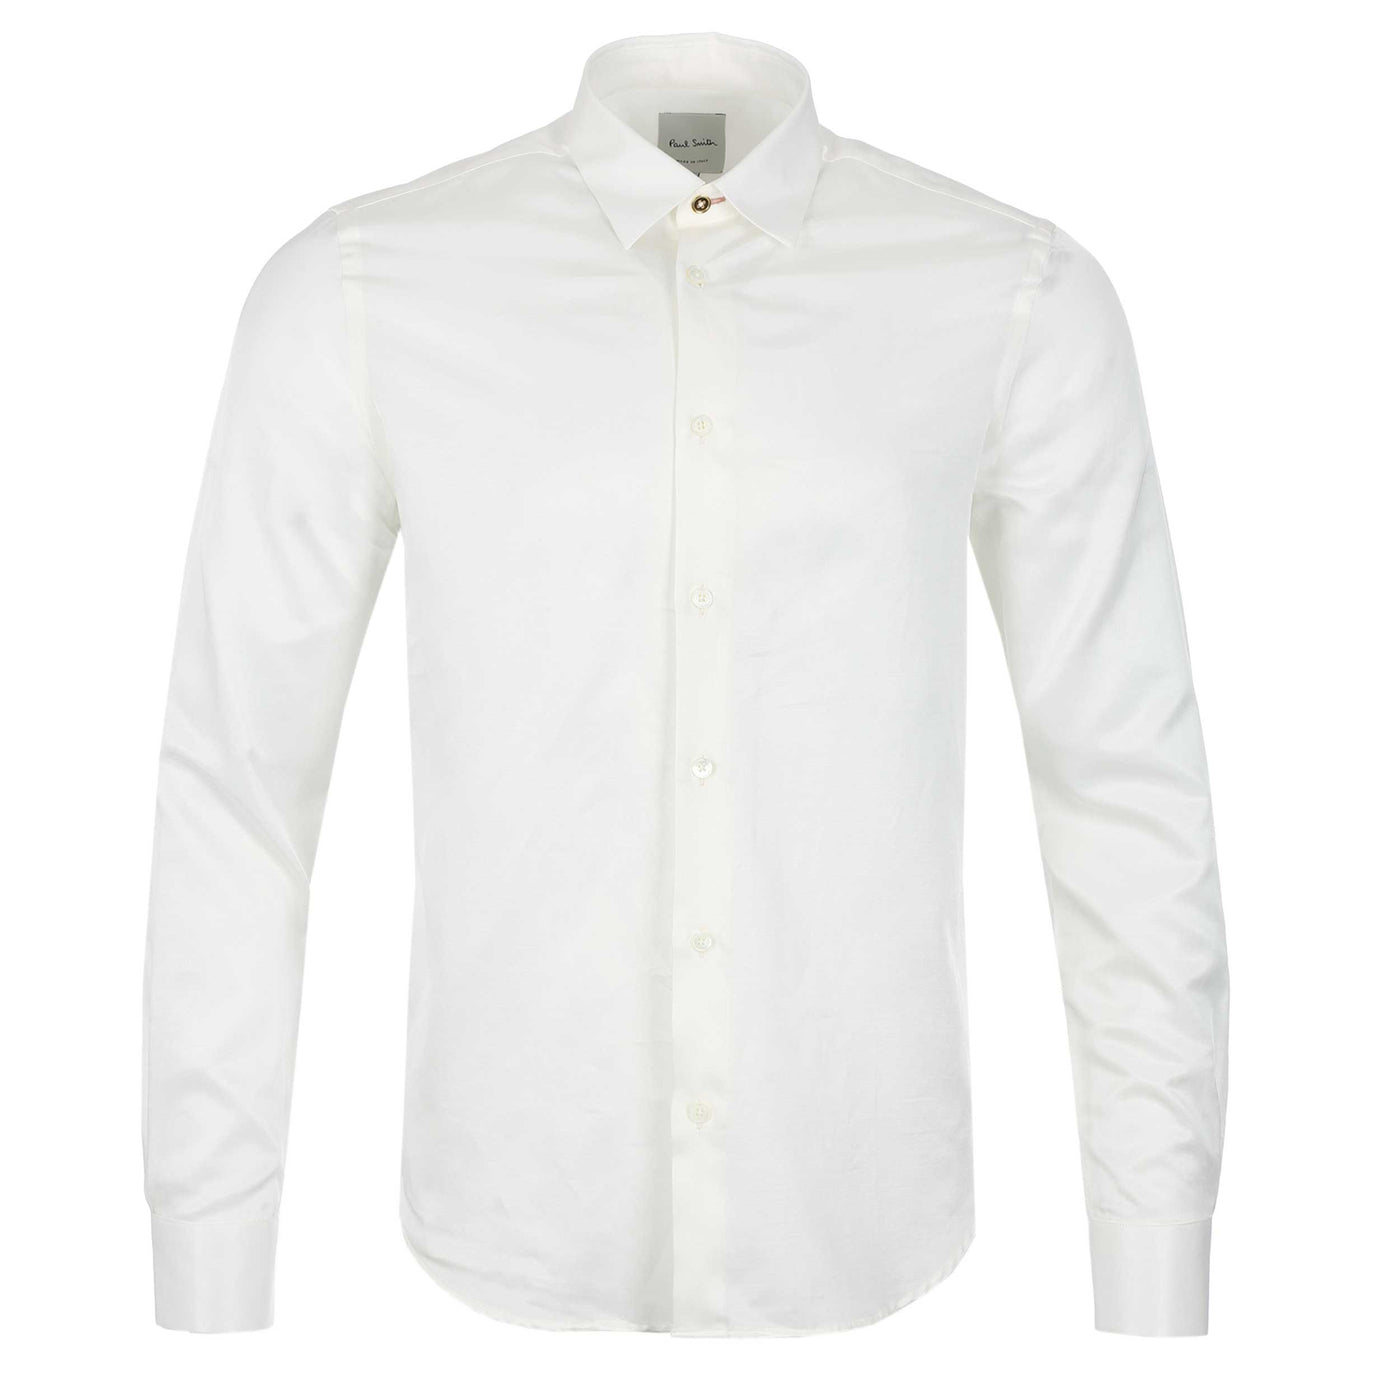 Paul Smith Slim Fit Shirt in Ivory